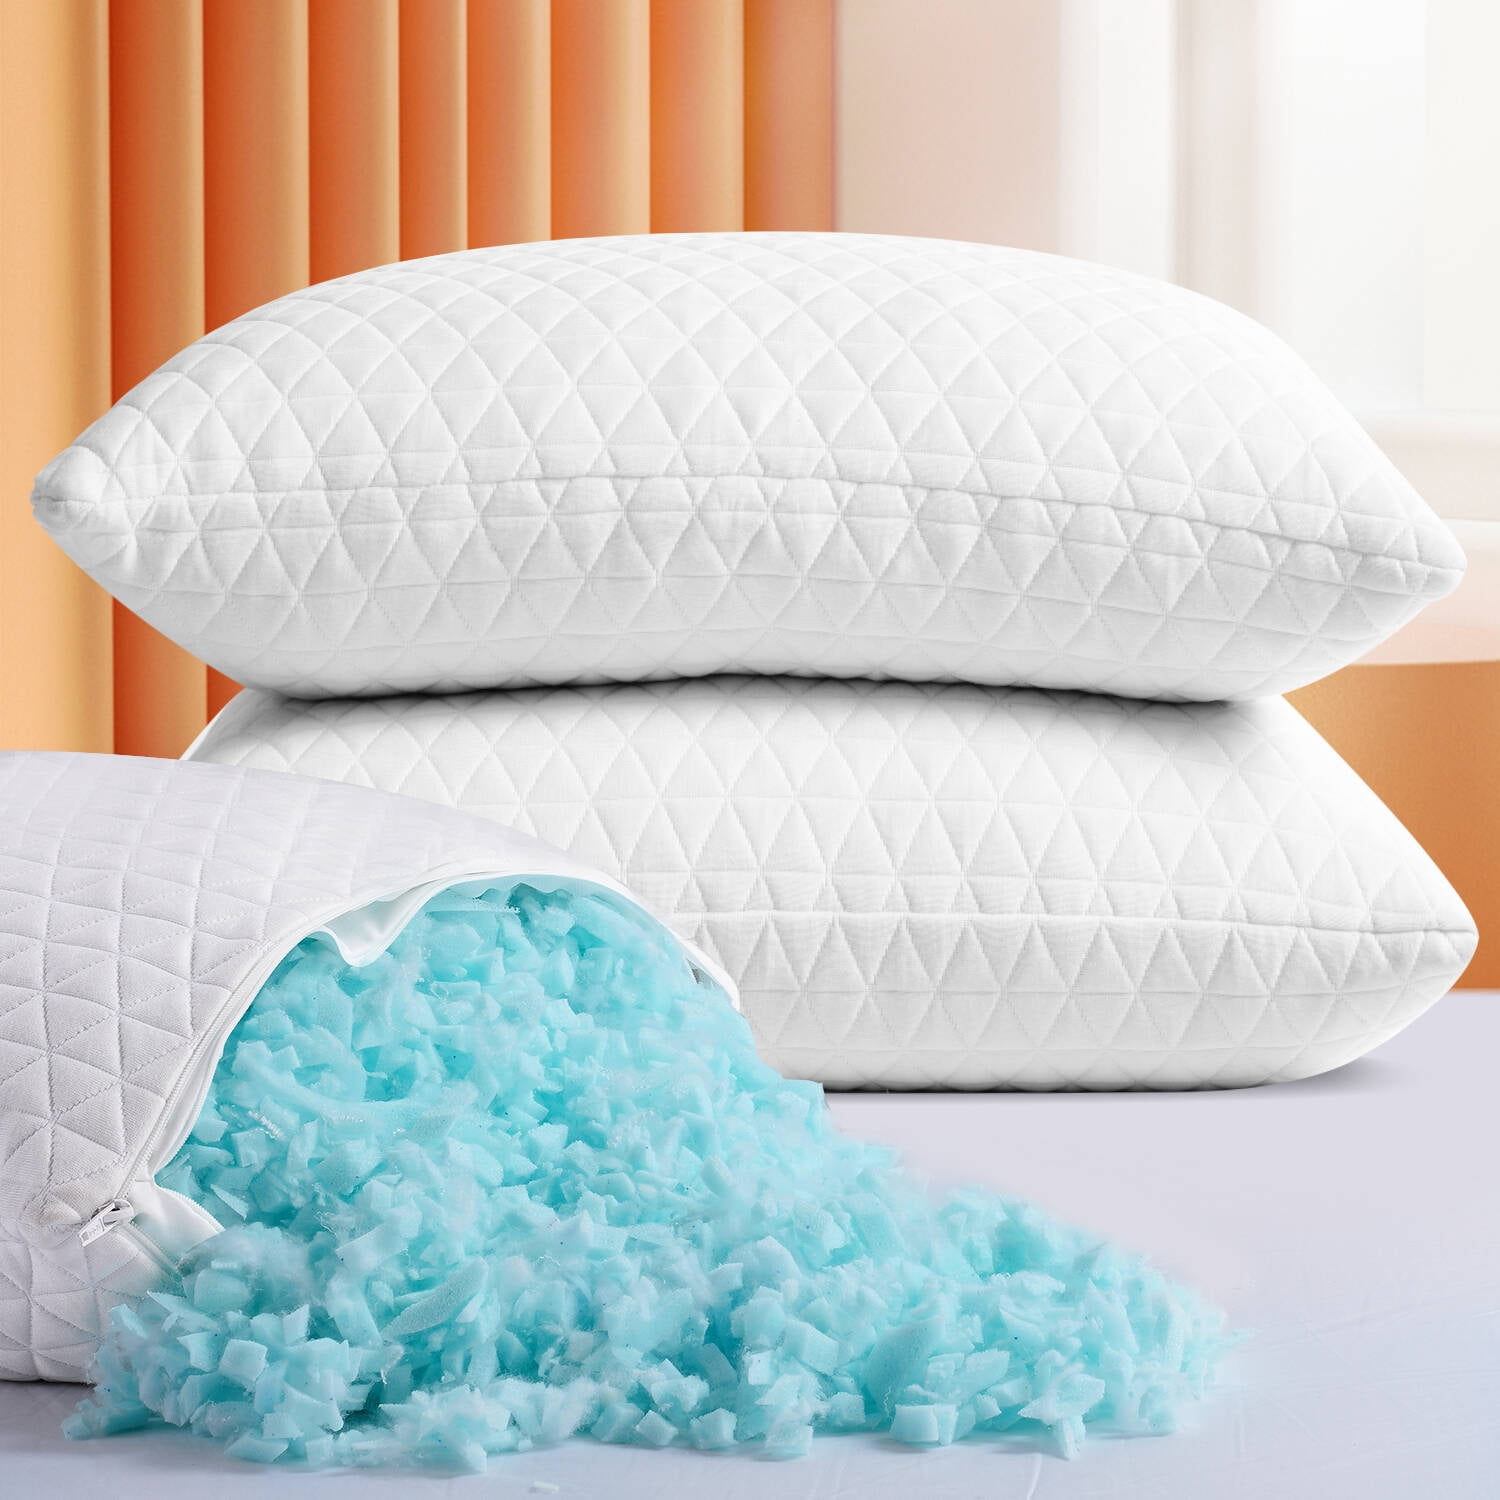 Shredded Memory Foam Pillows for Sleeping,Bed Pillows Queen Size Set of 2  Pack Adjustable,Good for Side and Back Sleeper with Washable Removable  Cover 